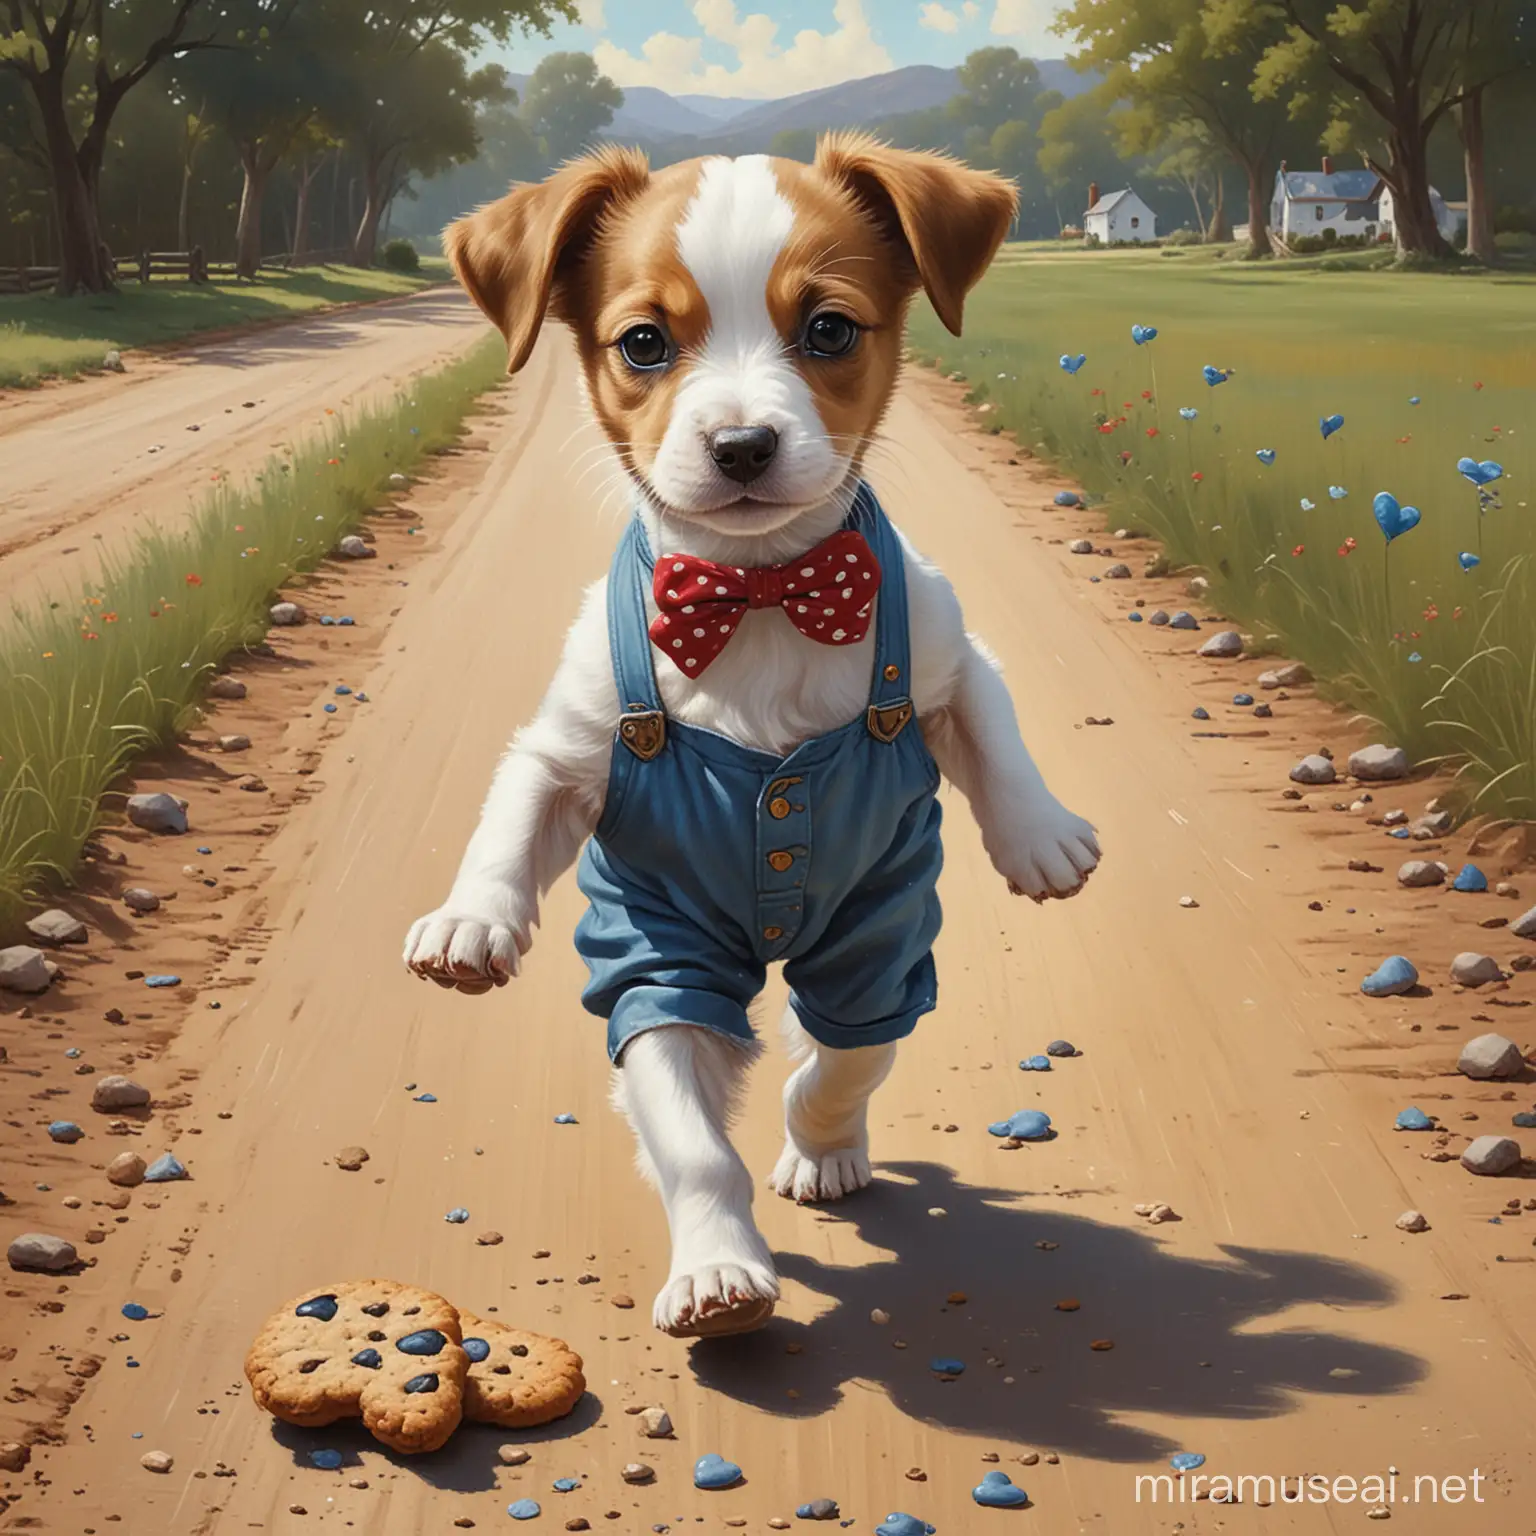 Whimsical Puppy in HeartPatterned Trousers Carrying a Cookie on a Rural Road